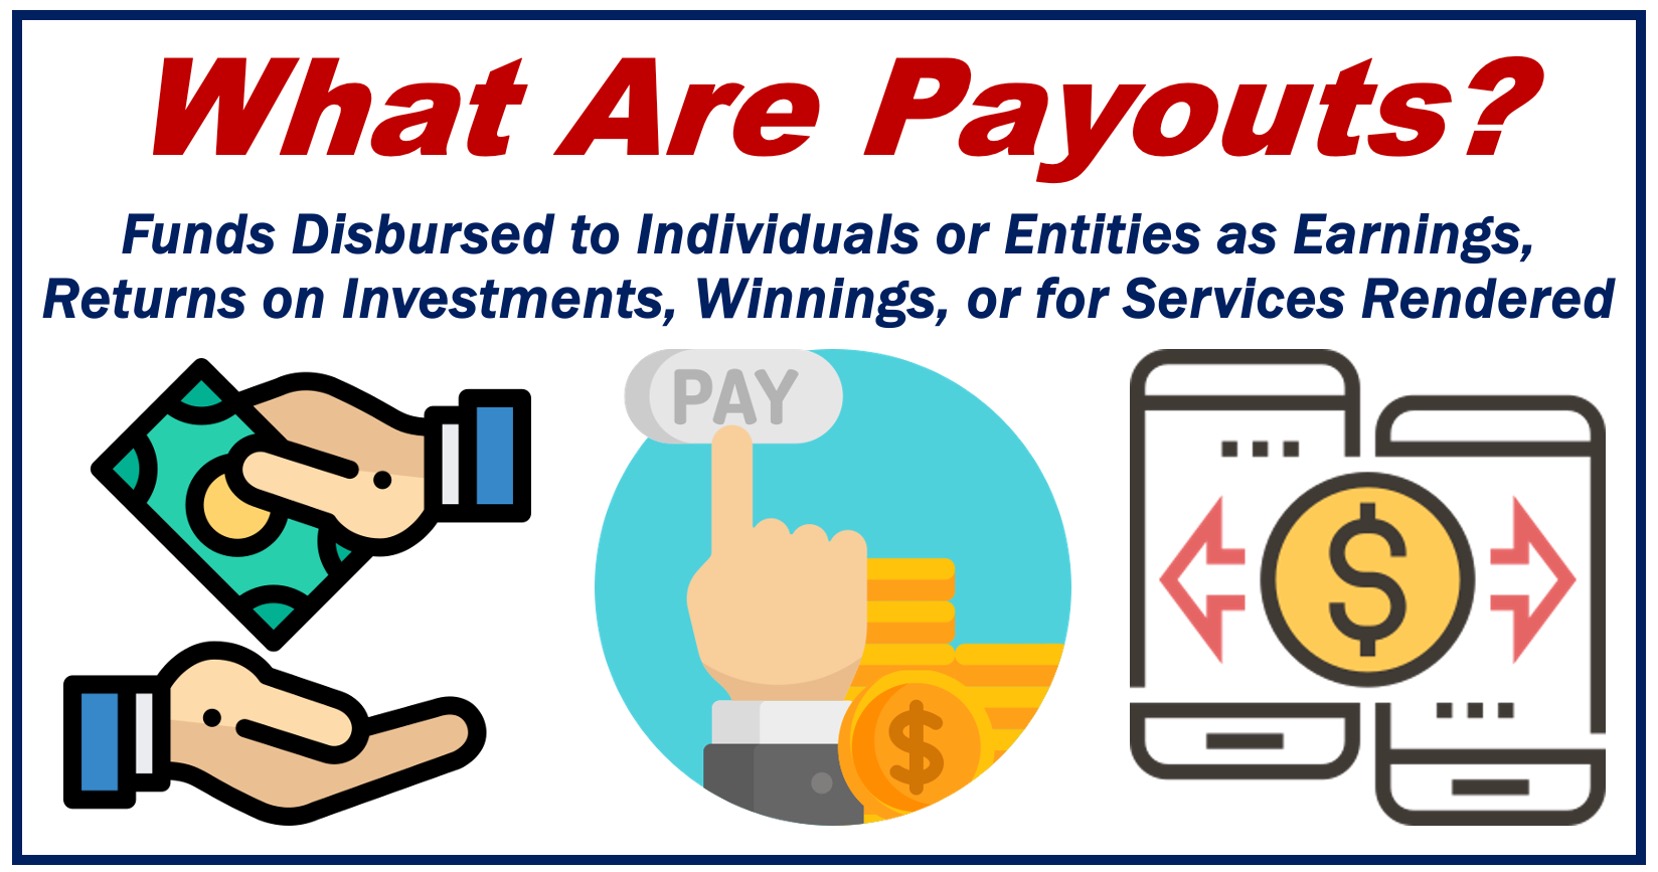 Three images depicting payouts